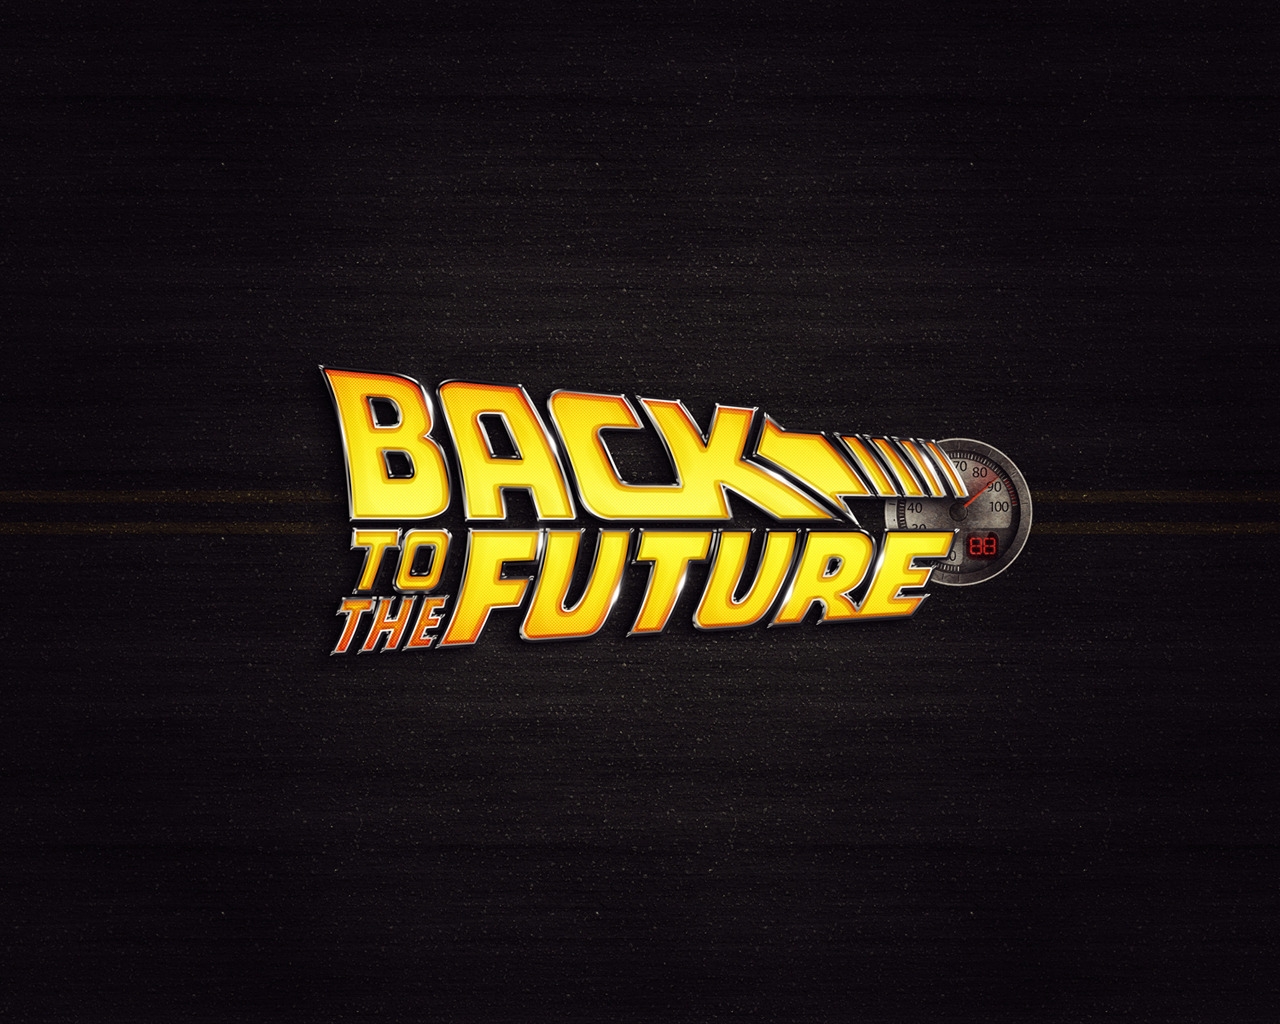 Back to the Future for 1280 x 1024 resolution